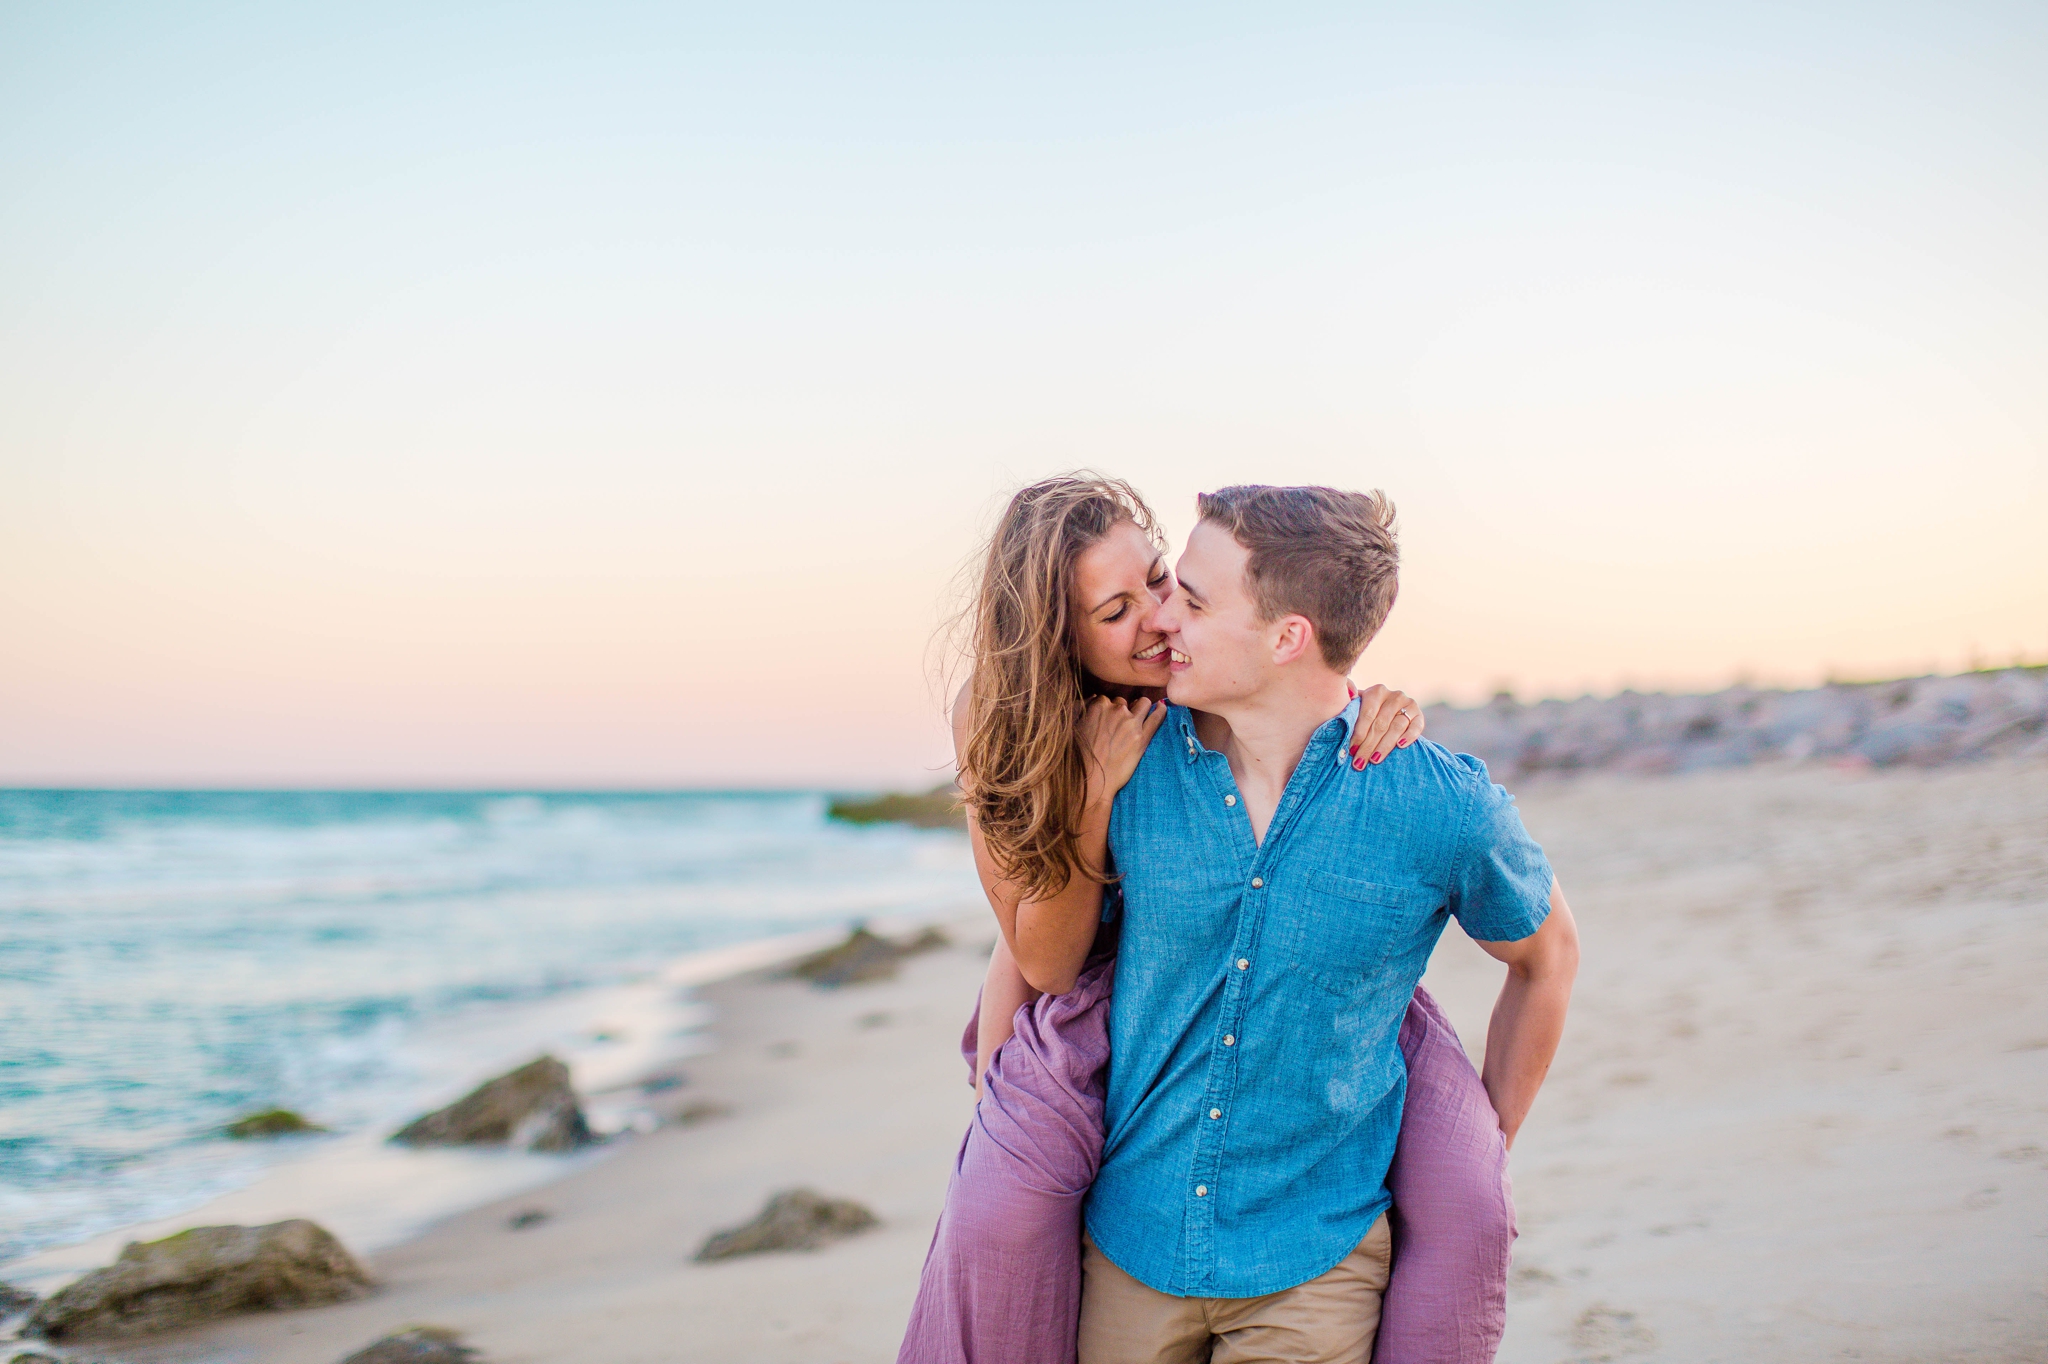  piggyback riding at the beach - - Woman is in a flowy pastel maxi dress - candid and unposed golden light session - beach engagement photographer in honolulu, oahu, hawaii - johanna dye photography 